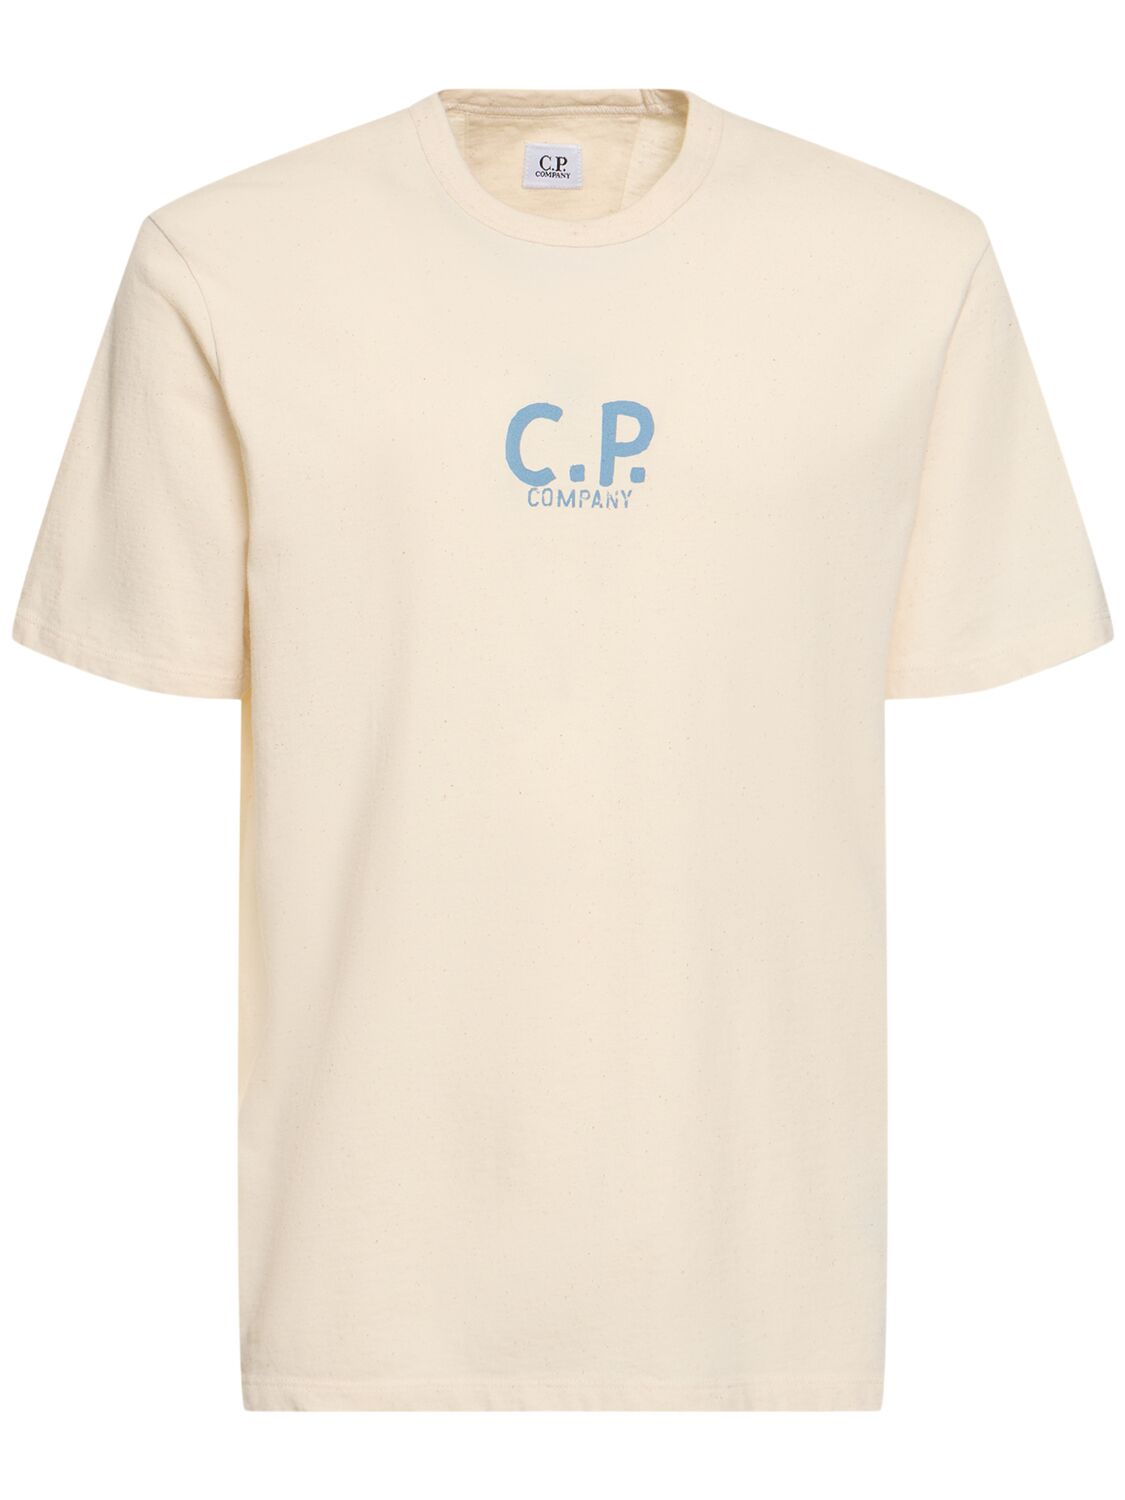 C.p. Company Natural T-shirt In Pistachio Shell